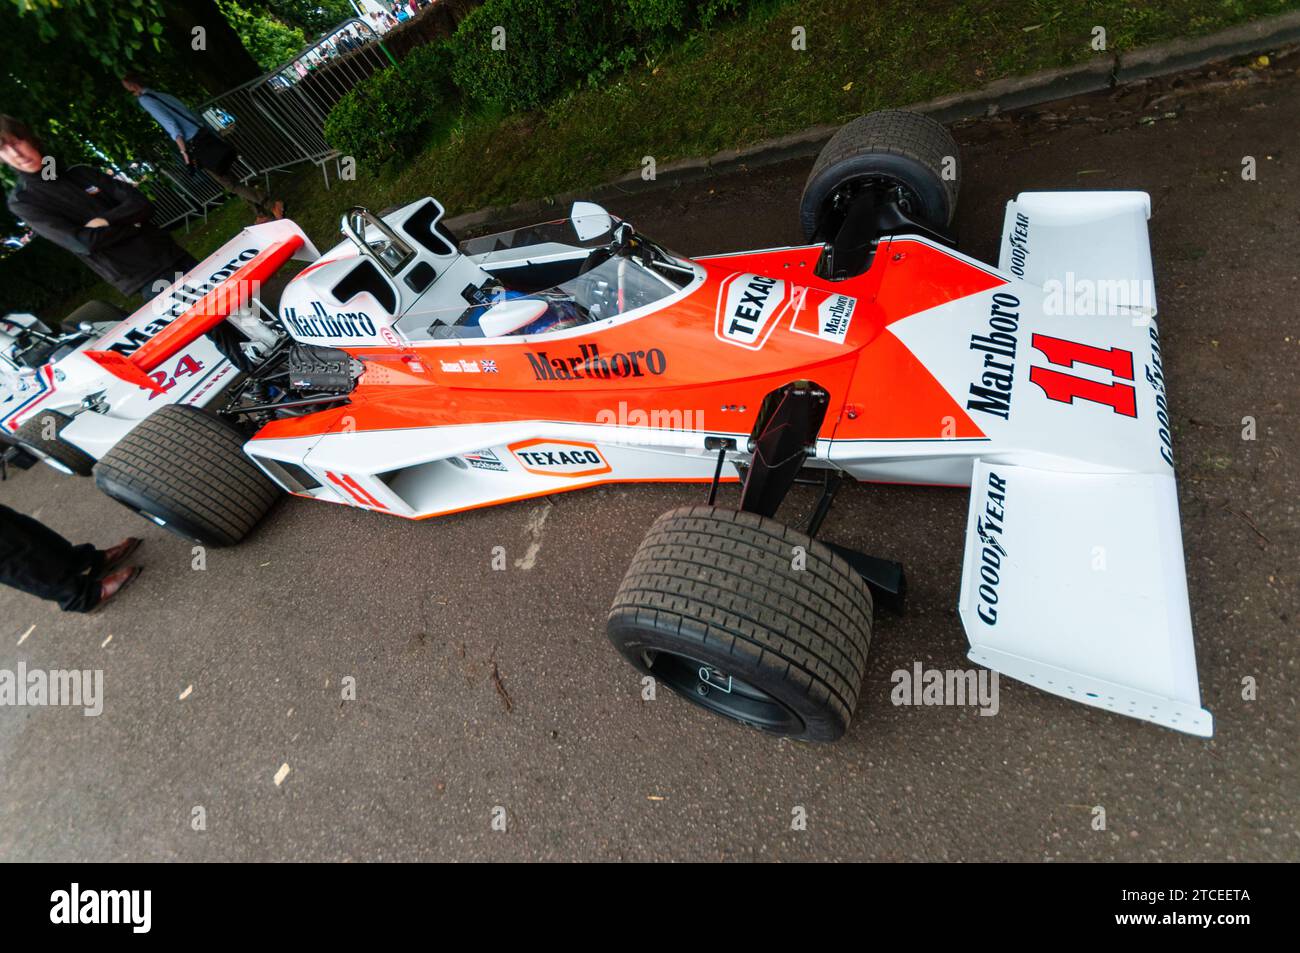 James Hunt's 1976 McLaren Cosworth M23D at the 2016 Goodwood Festival of Speed celebrating the fortieth year of his Grand Prix Formula 1 title win Stock Photo